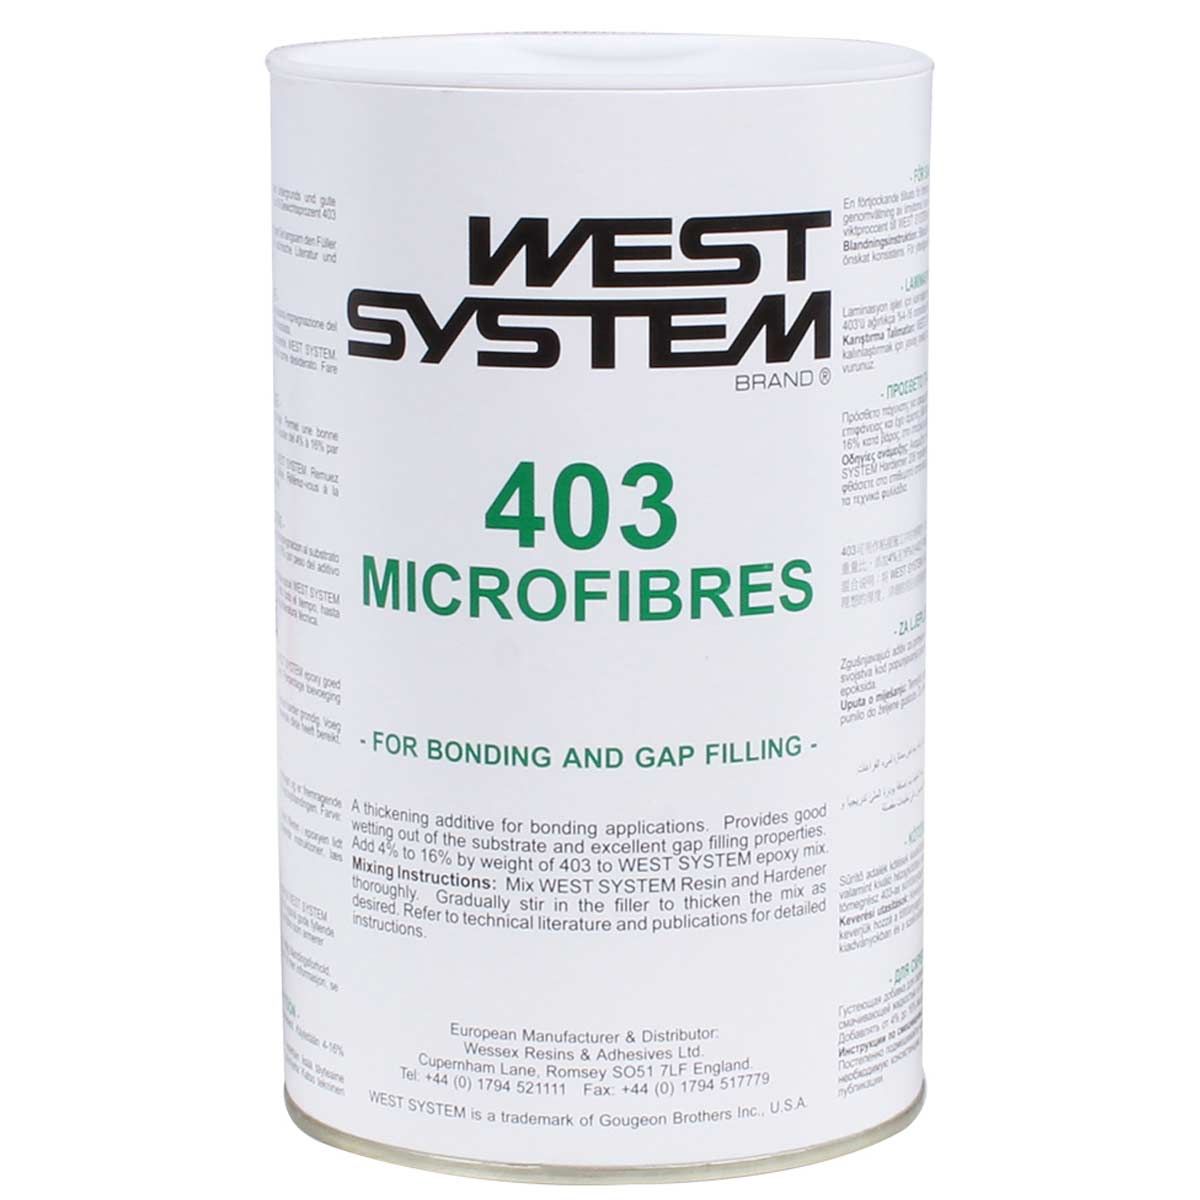 West System 403 Microfibres for Bonding Applications - 150G